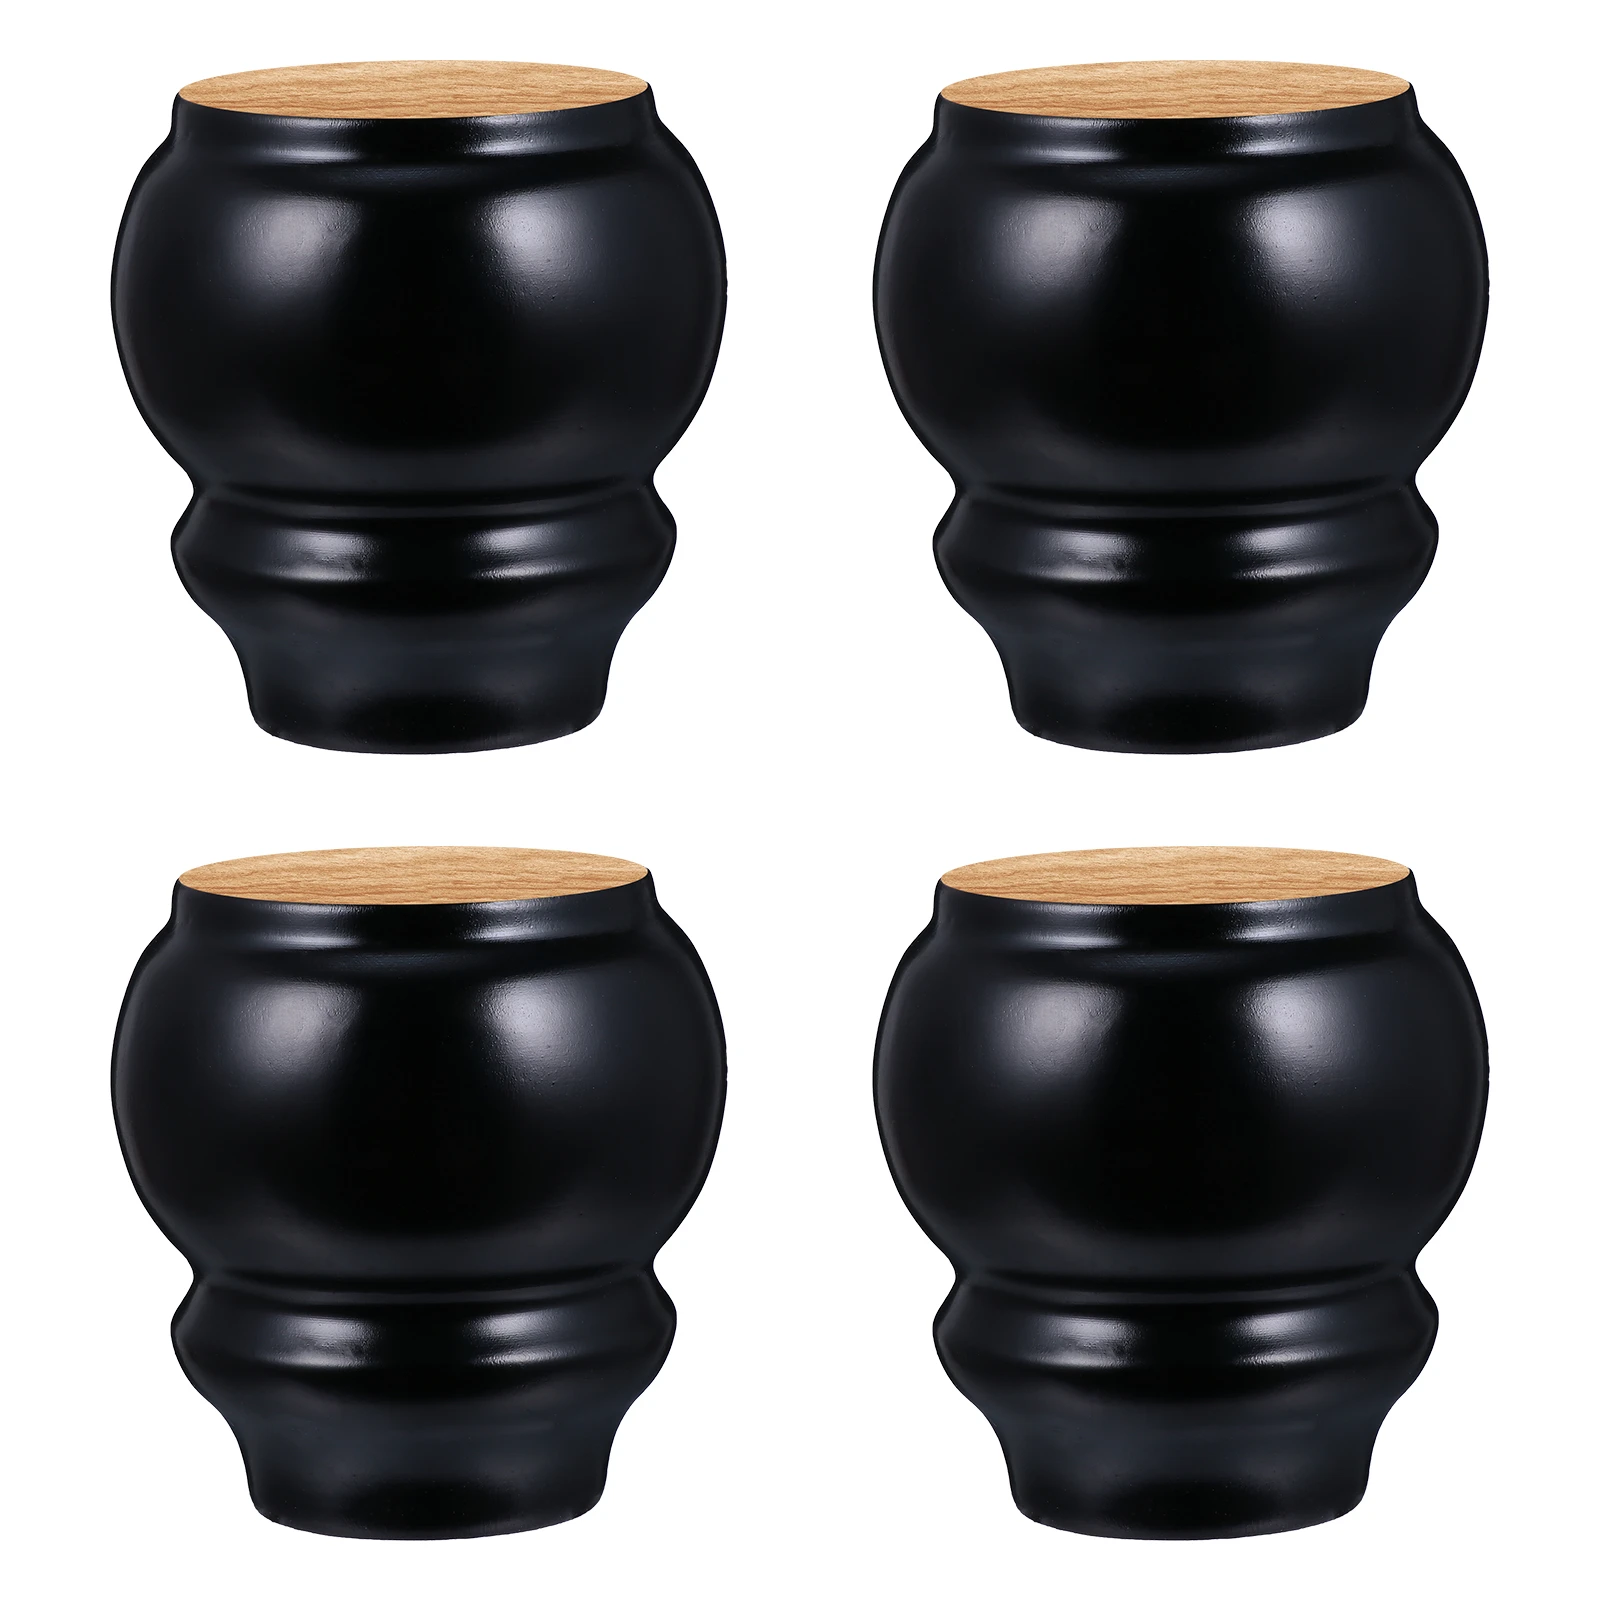 Directamente Plisado S t 4 Black Wooden Round Furniture Feet Replacement Dresser Sofa Legs for DIY  Armchair Chair Table Cabinet Height Leveler Risers| | - AliExpress